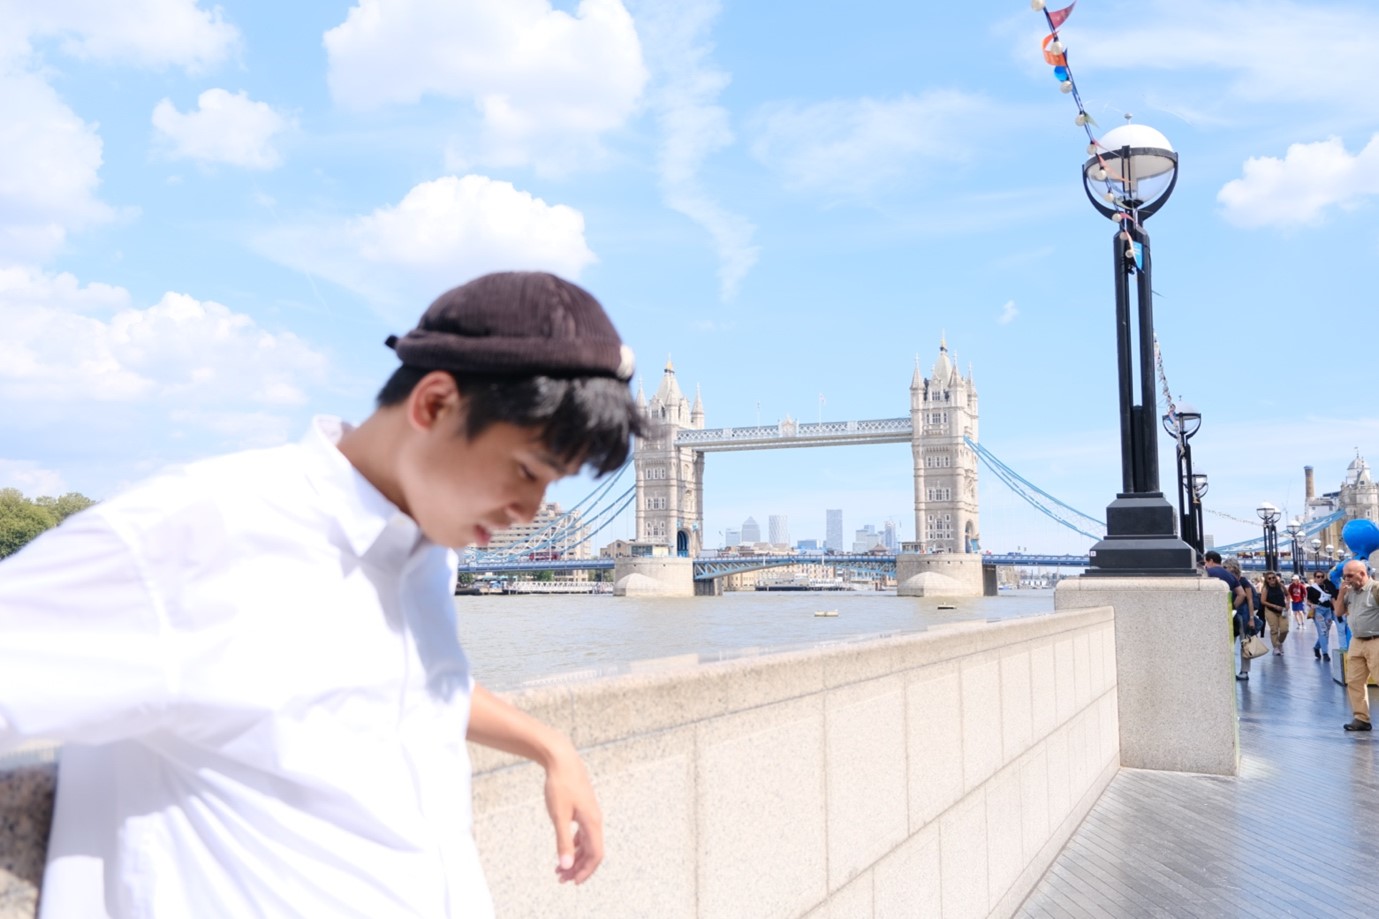 Image of student posing in front of Tower London and River Thames